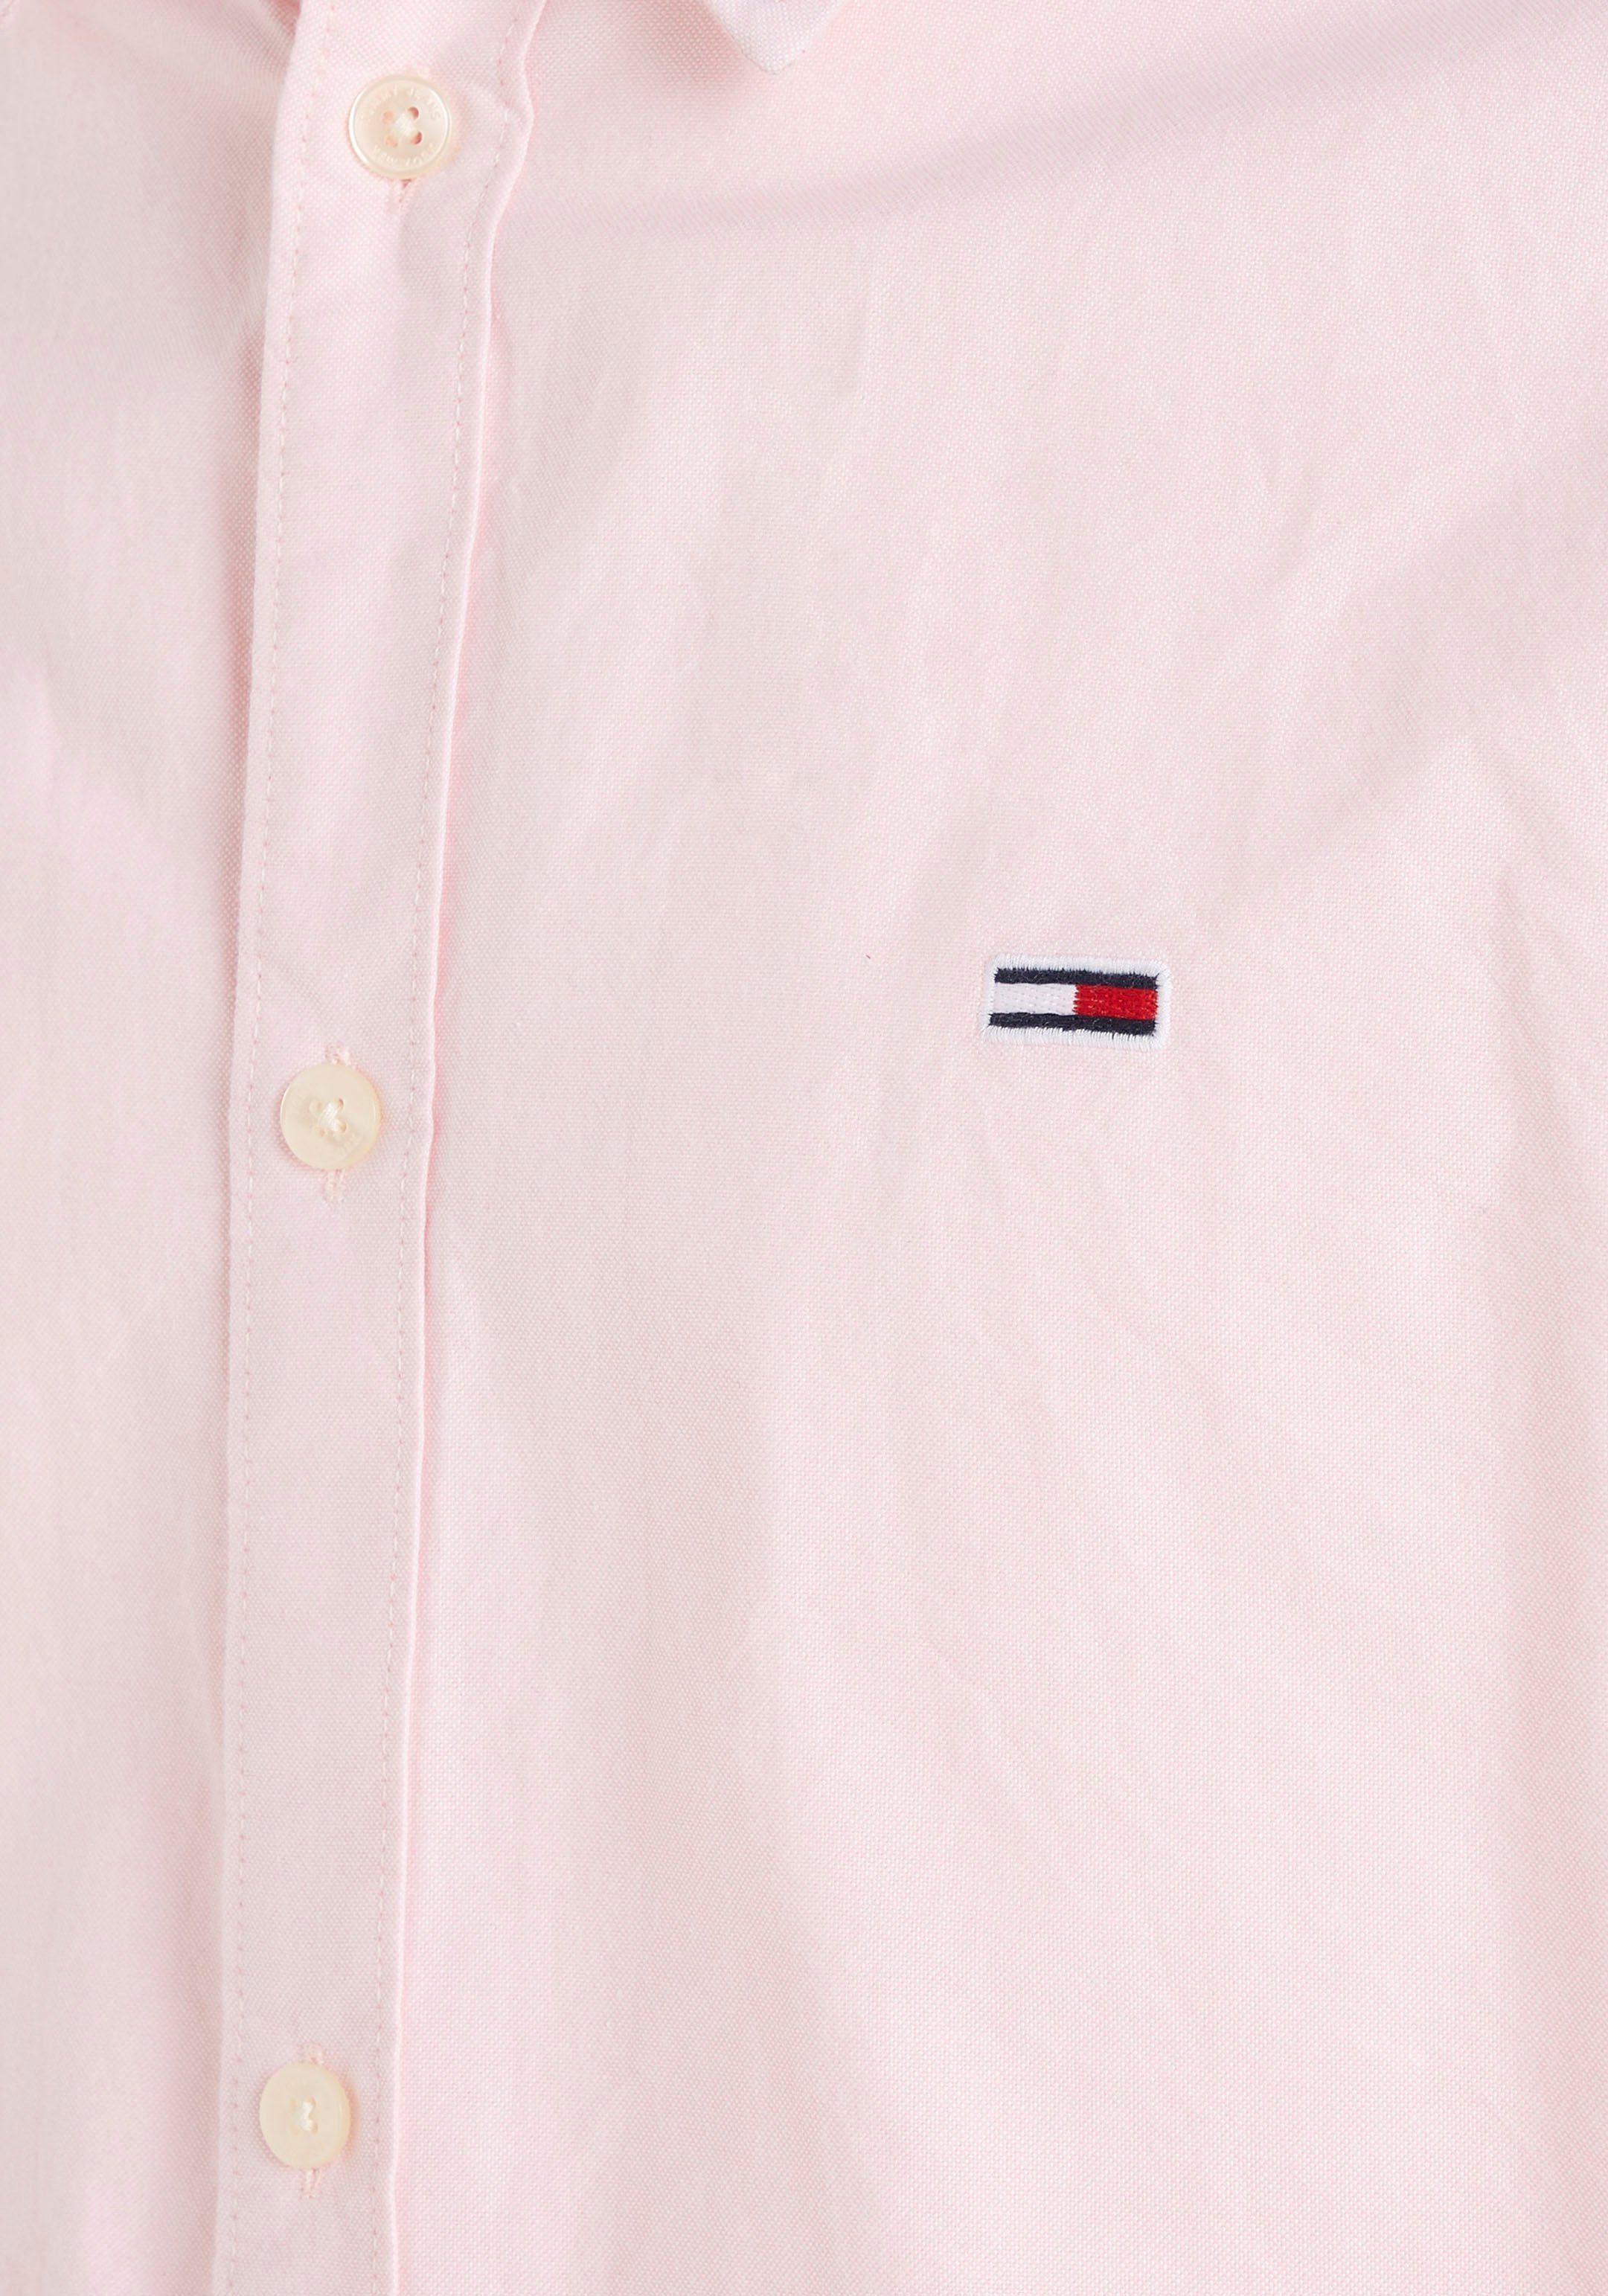 Tommy Jeans Langarmhemd TJM CLASSIC pink SHIRT mit Knopfleiste OXFORD